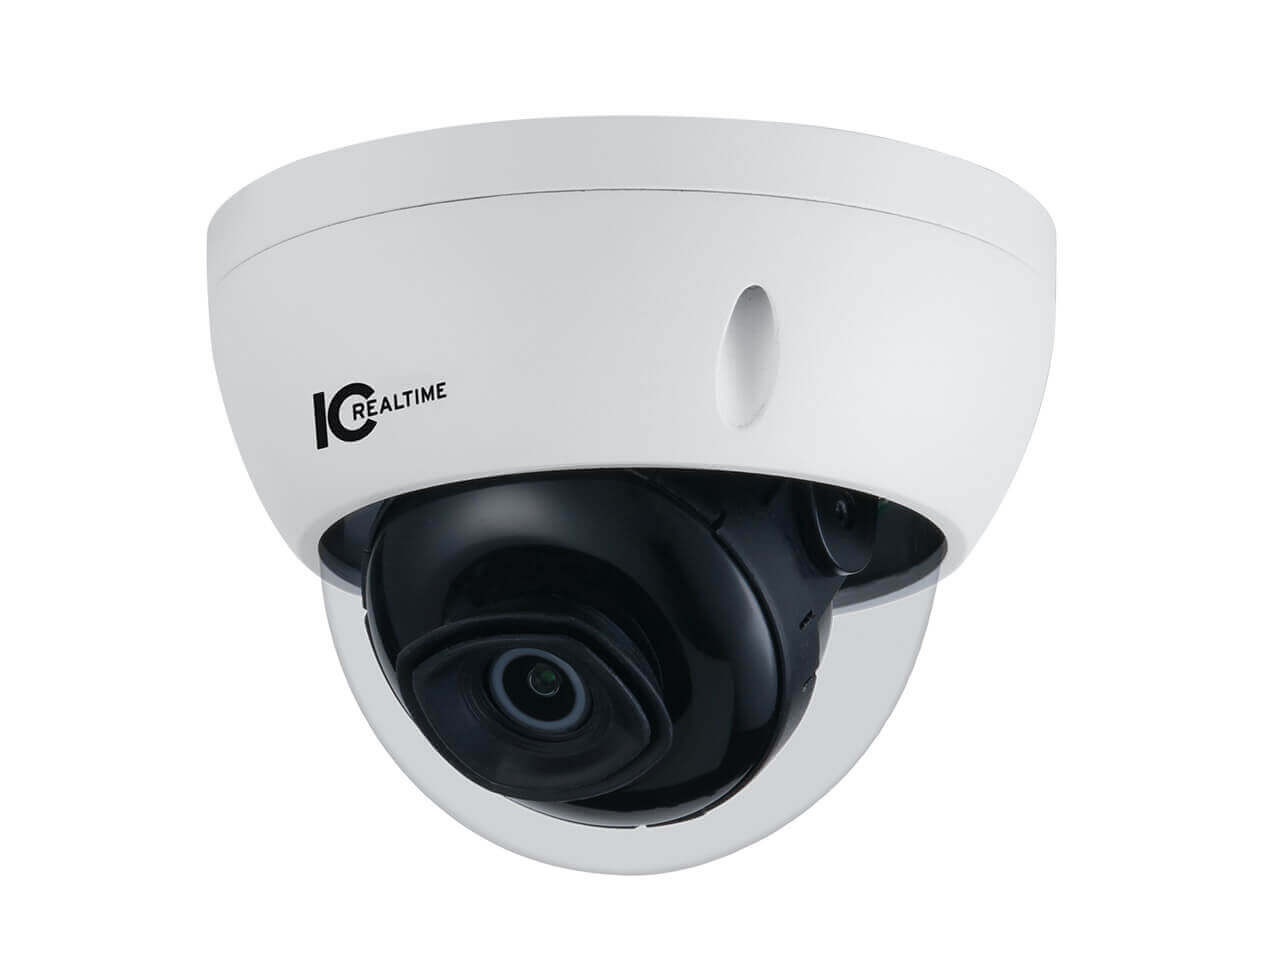 IPMX-D40F-W1 4MP IP Indoor/Outdoor Small Size Eyeball Dome Camera by ICRealtime